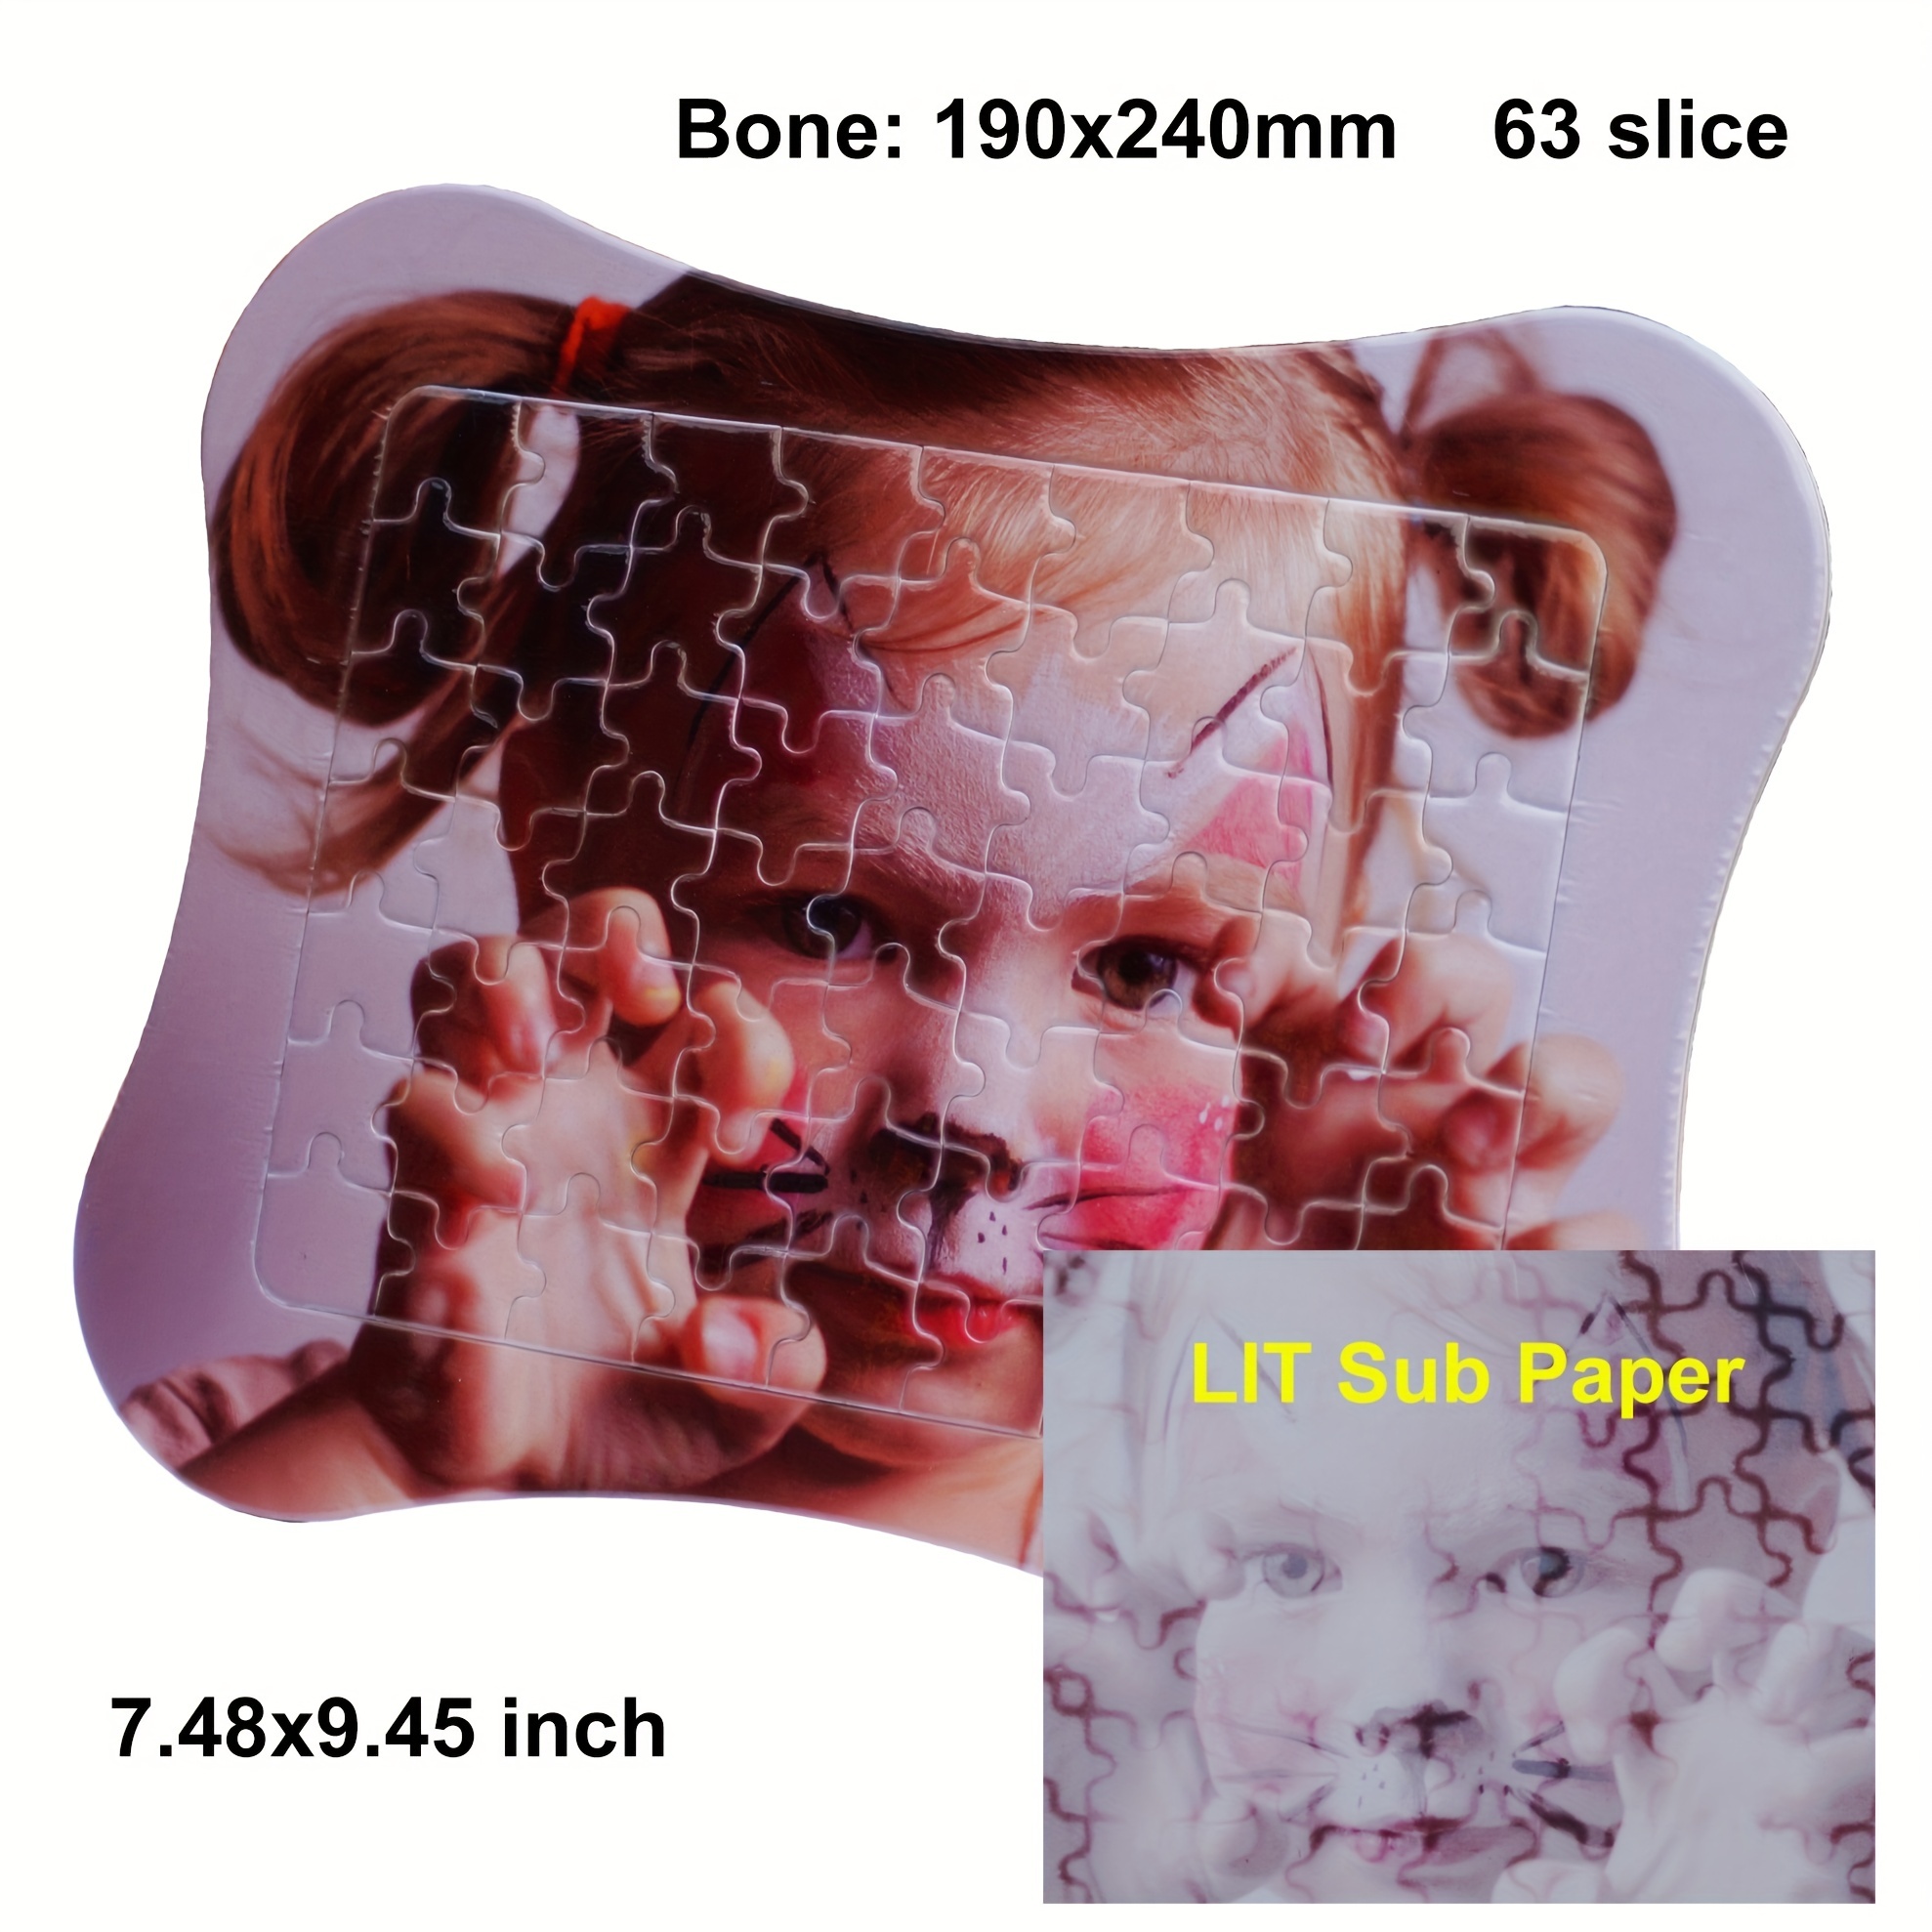 Lit Paper 10 Sets Sublimation Jigsaw Puzzle Blanks Combo 2 x A4 - DIY Heat Press Transfer Crafts 120 80 Slices Thermal Transfer Blank Puzzles for